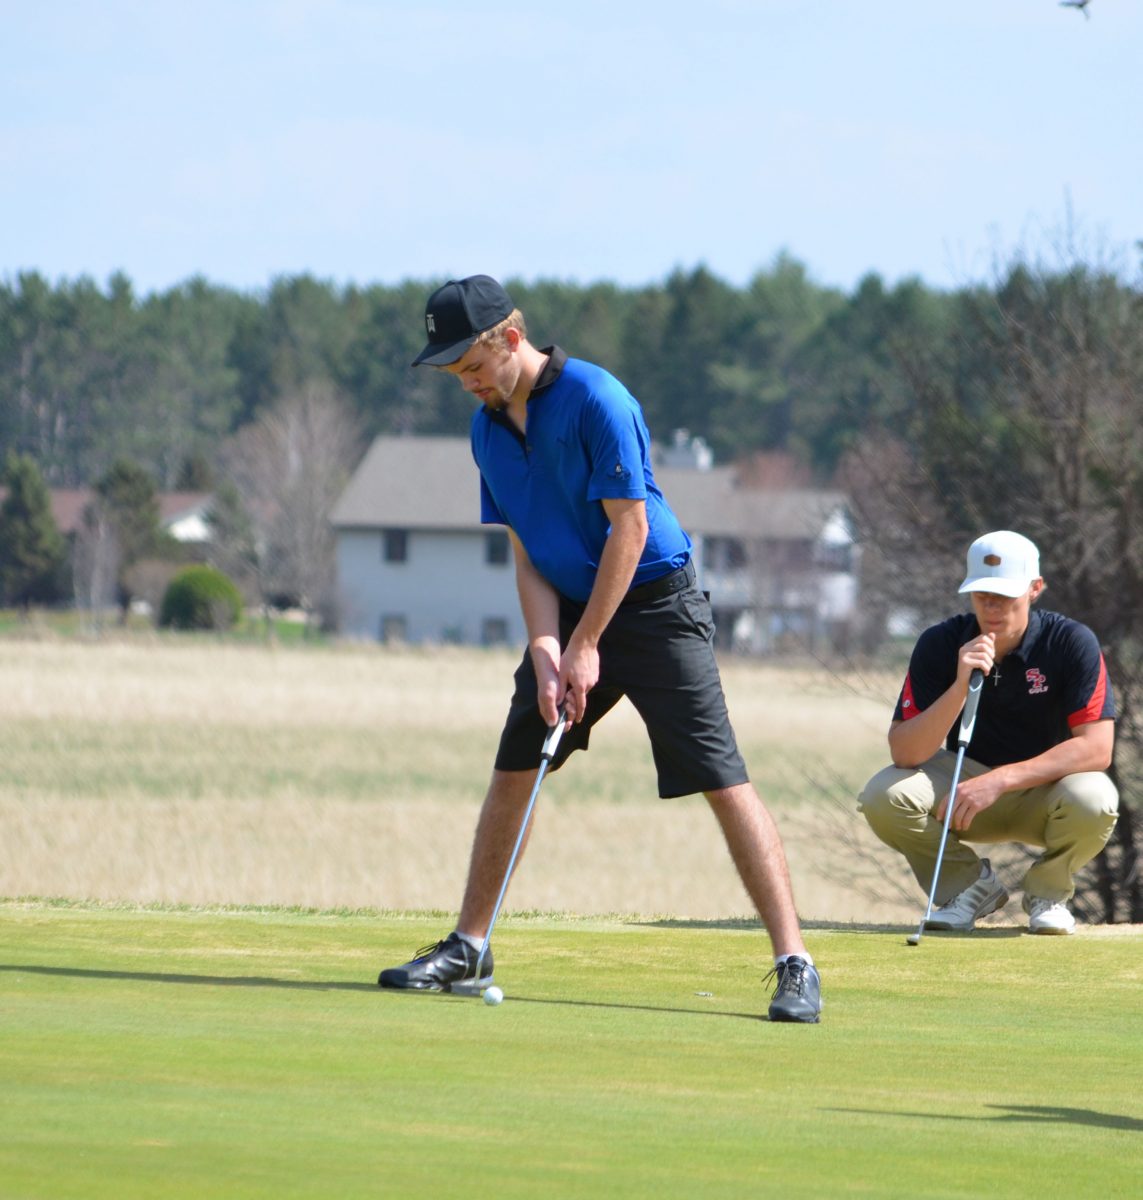 Dettmering to golf at State tournament